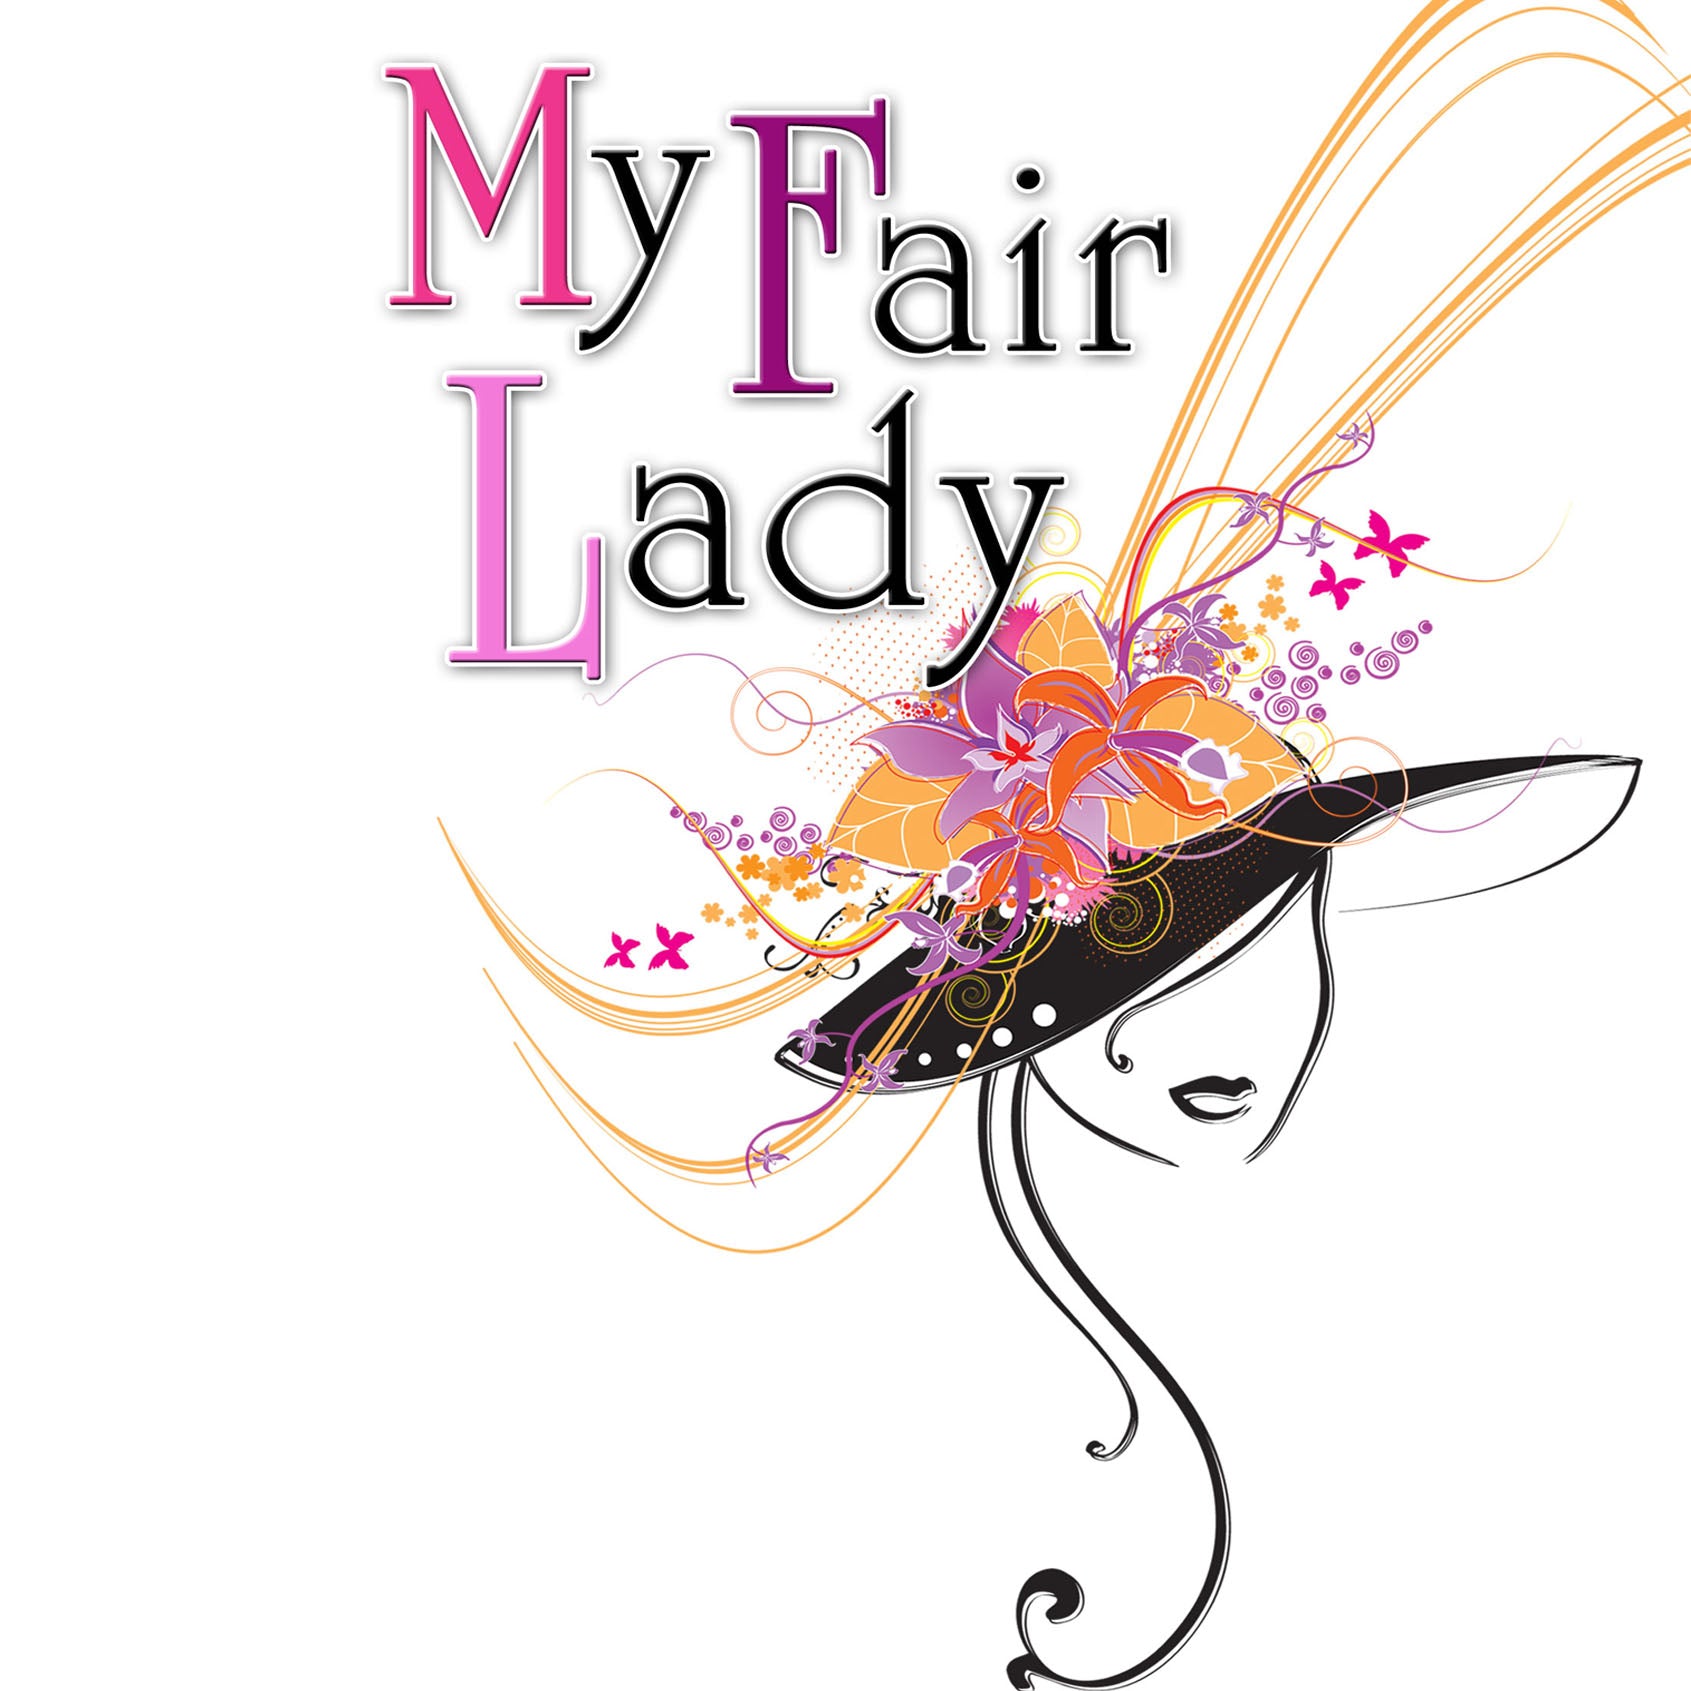 My Fair Lady performed by Devon Preparatory School Theater - Active Image Media